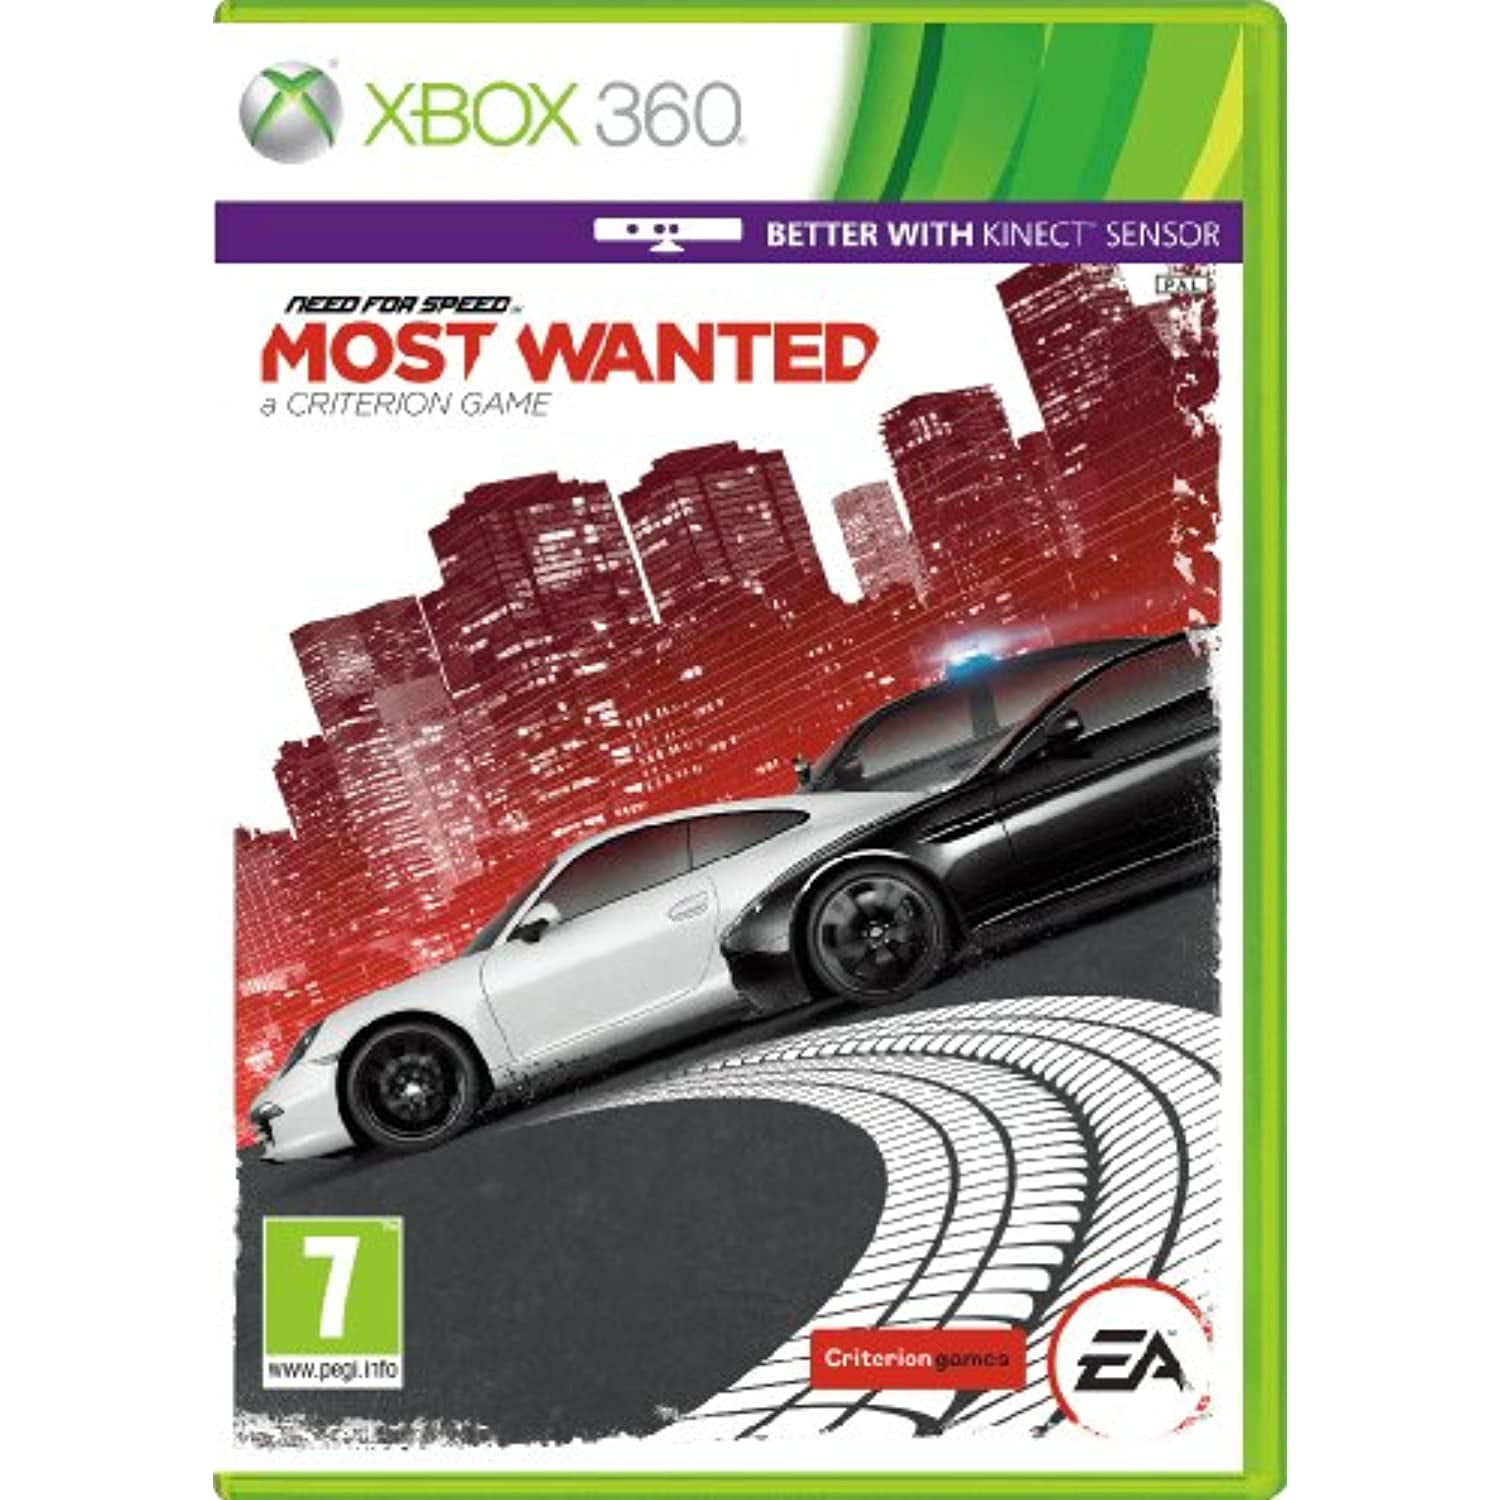 Nfs most wanted xbox. Most wanted Xbox 360. Xbox 360 гонки нфс. Need for Speed most wanted Xbox 360. NFS most wanted диск Xbox 360.